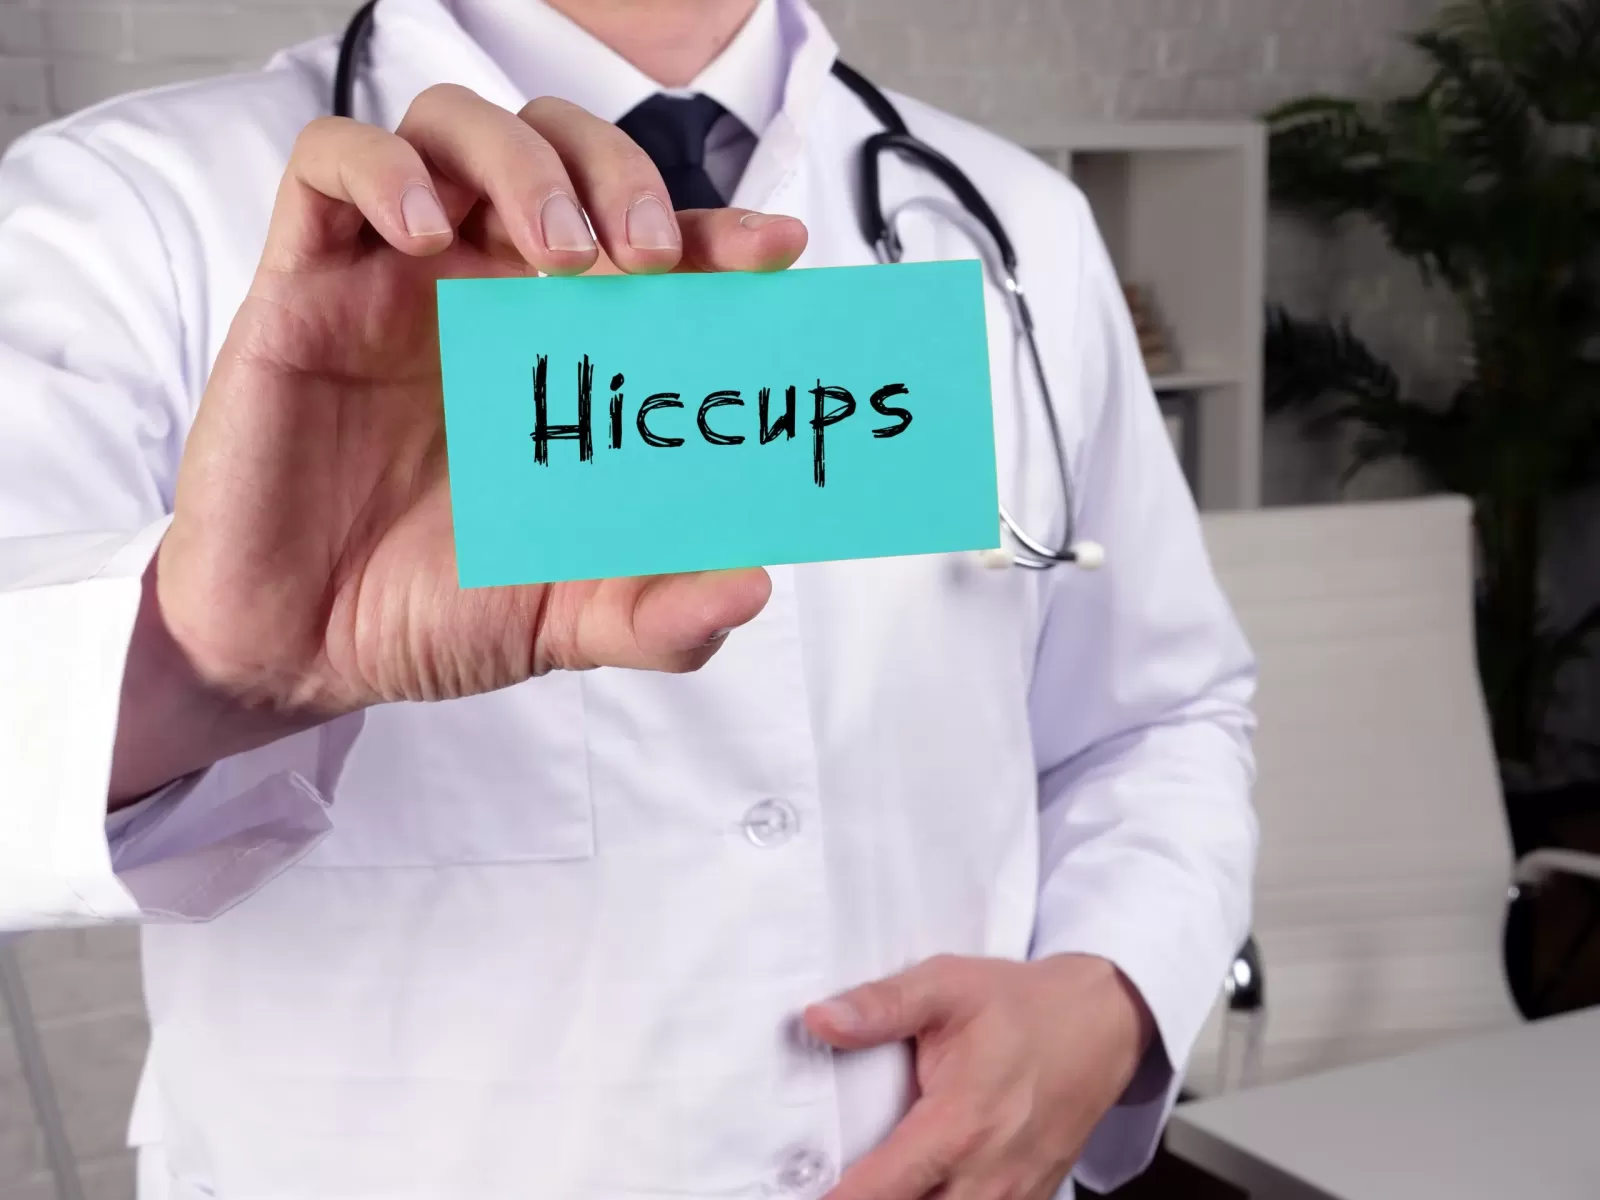 Why do we have hiccups